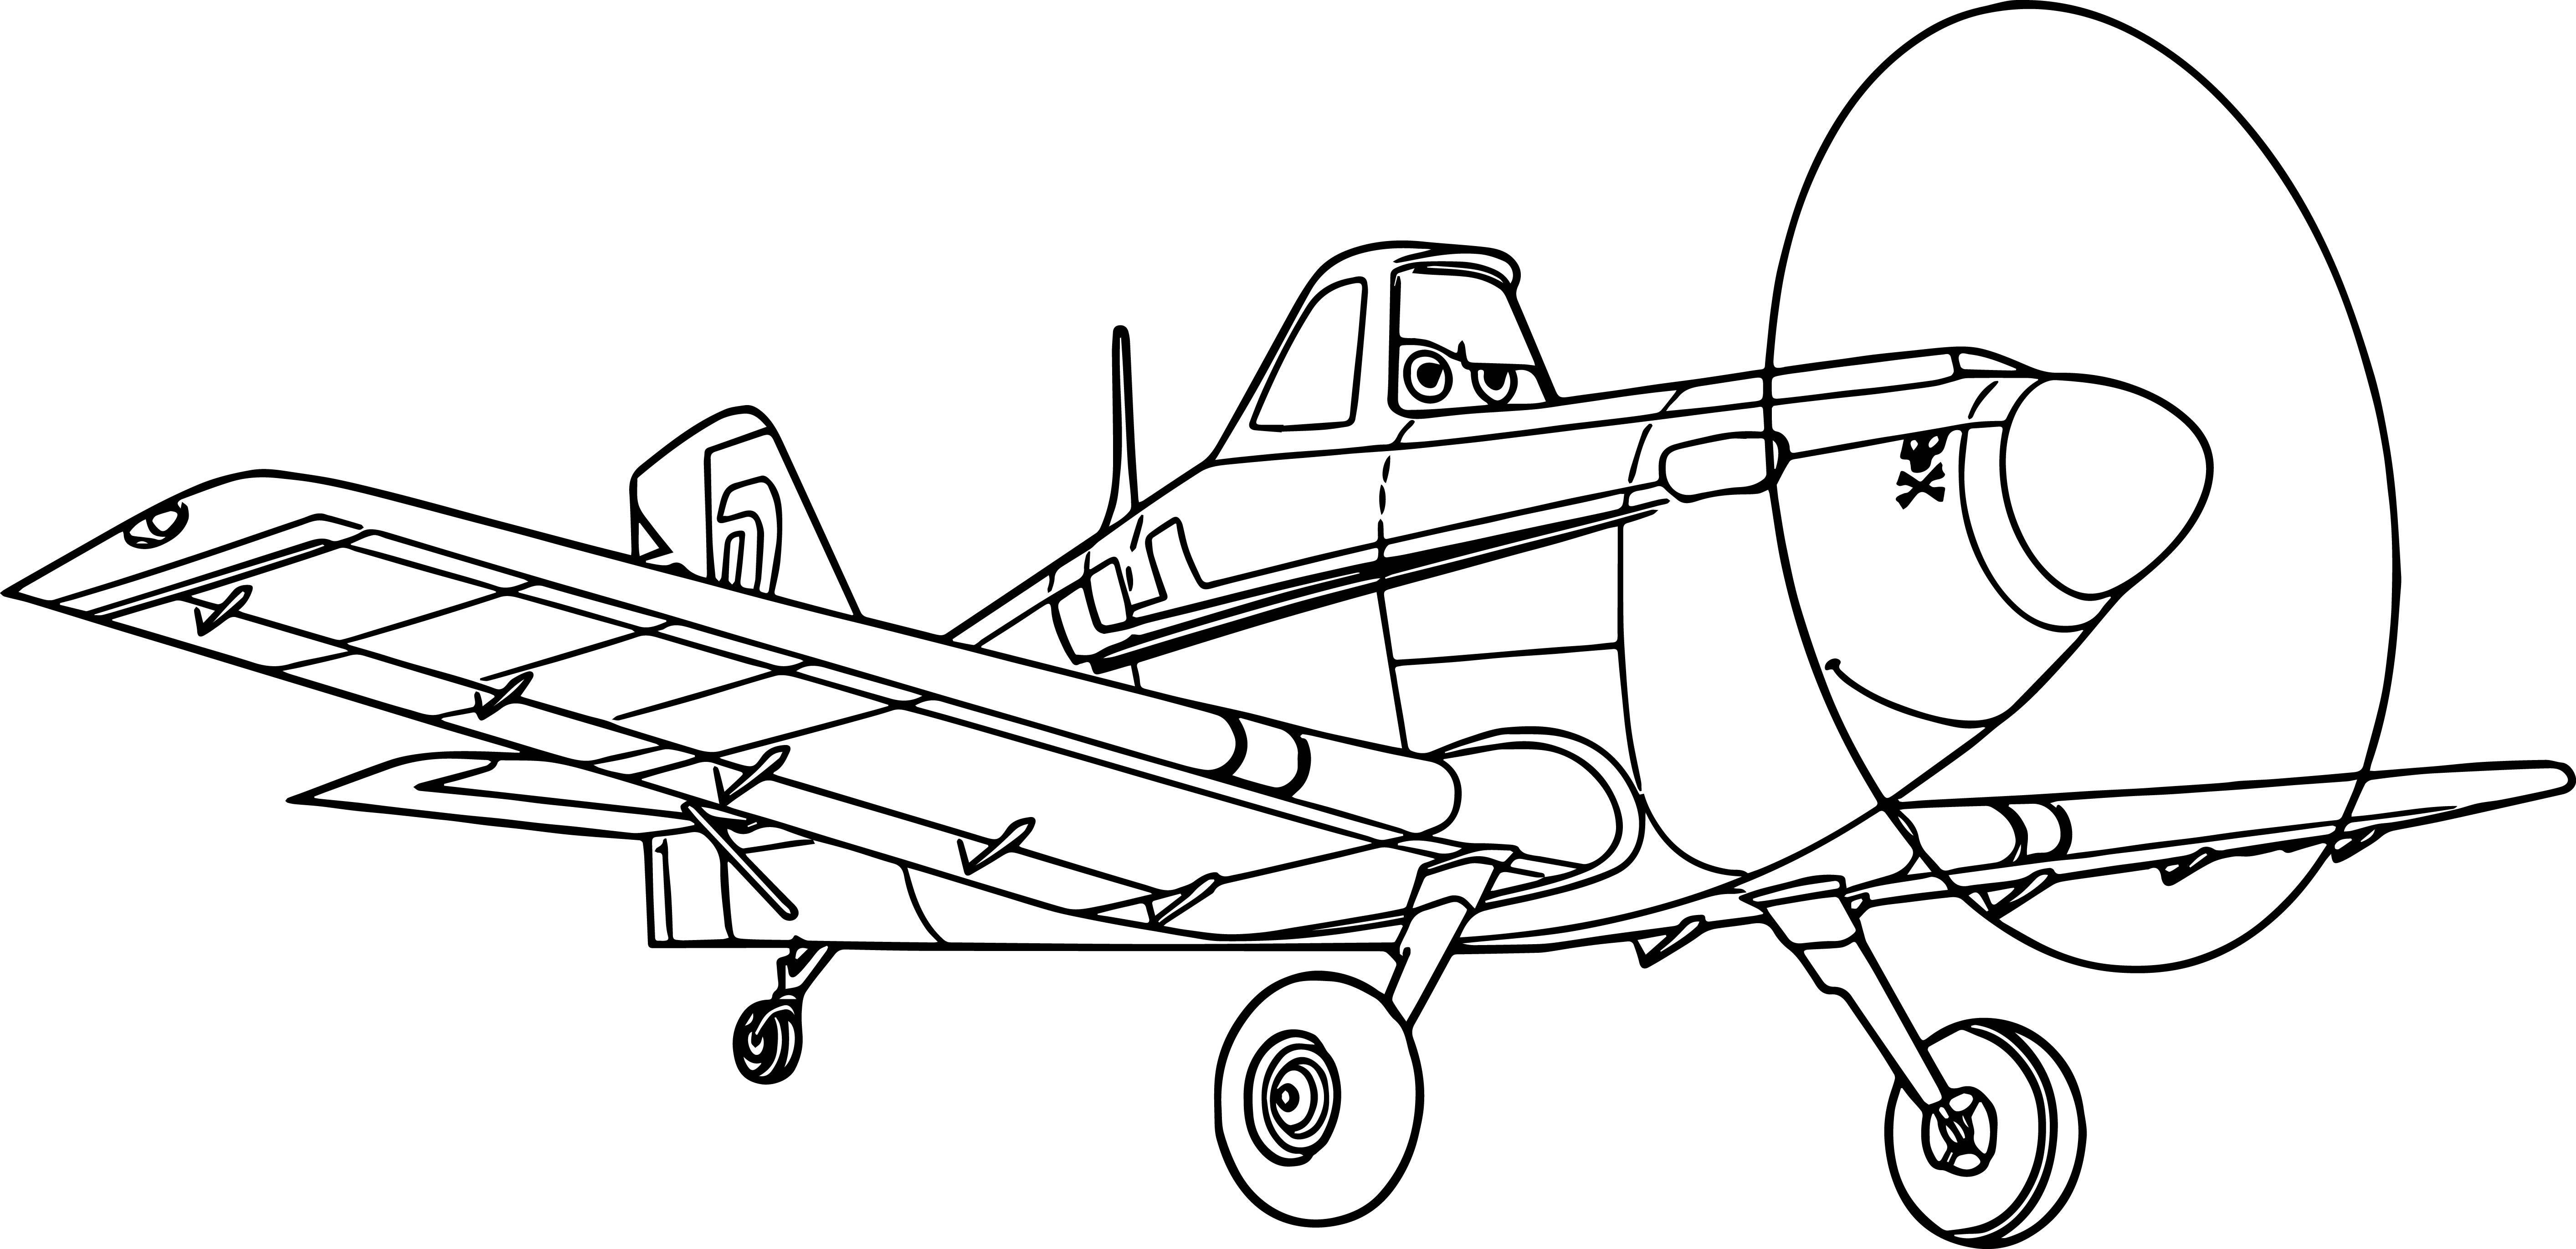 Cool Air Plane 15 Coloring Page